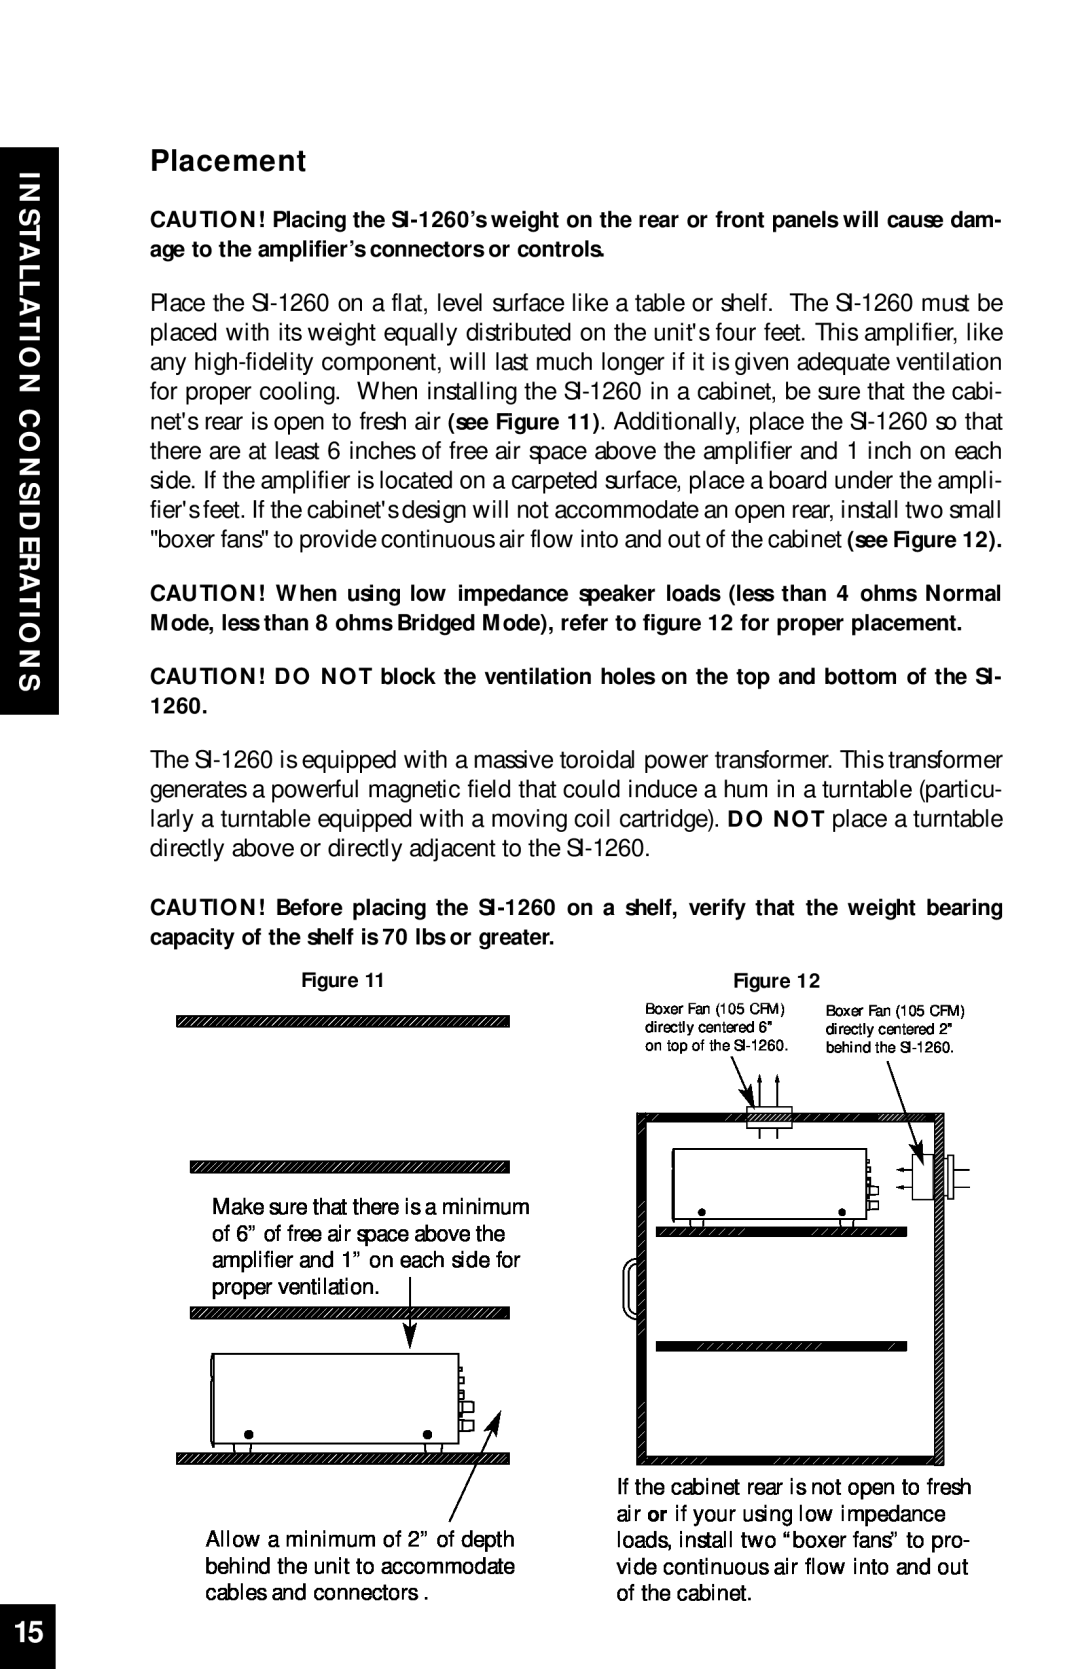 Niles Audio SI-1260 manual Installation Considerations, Placement 